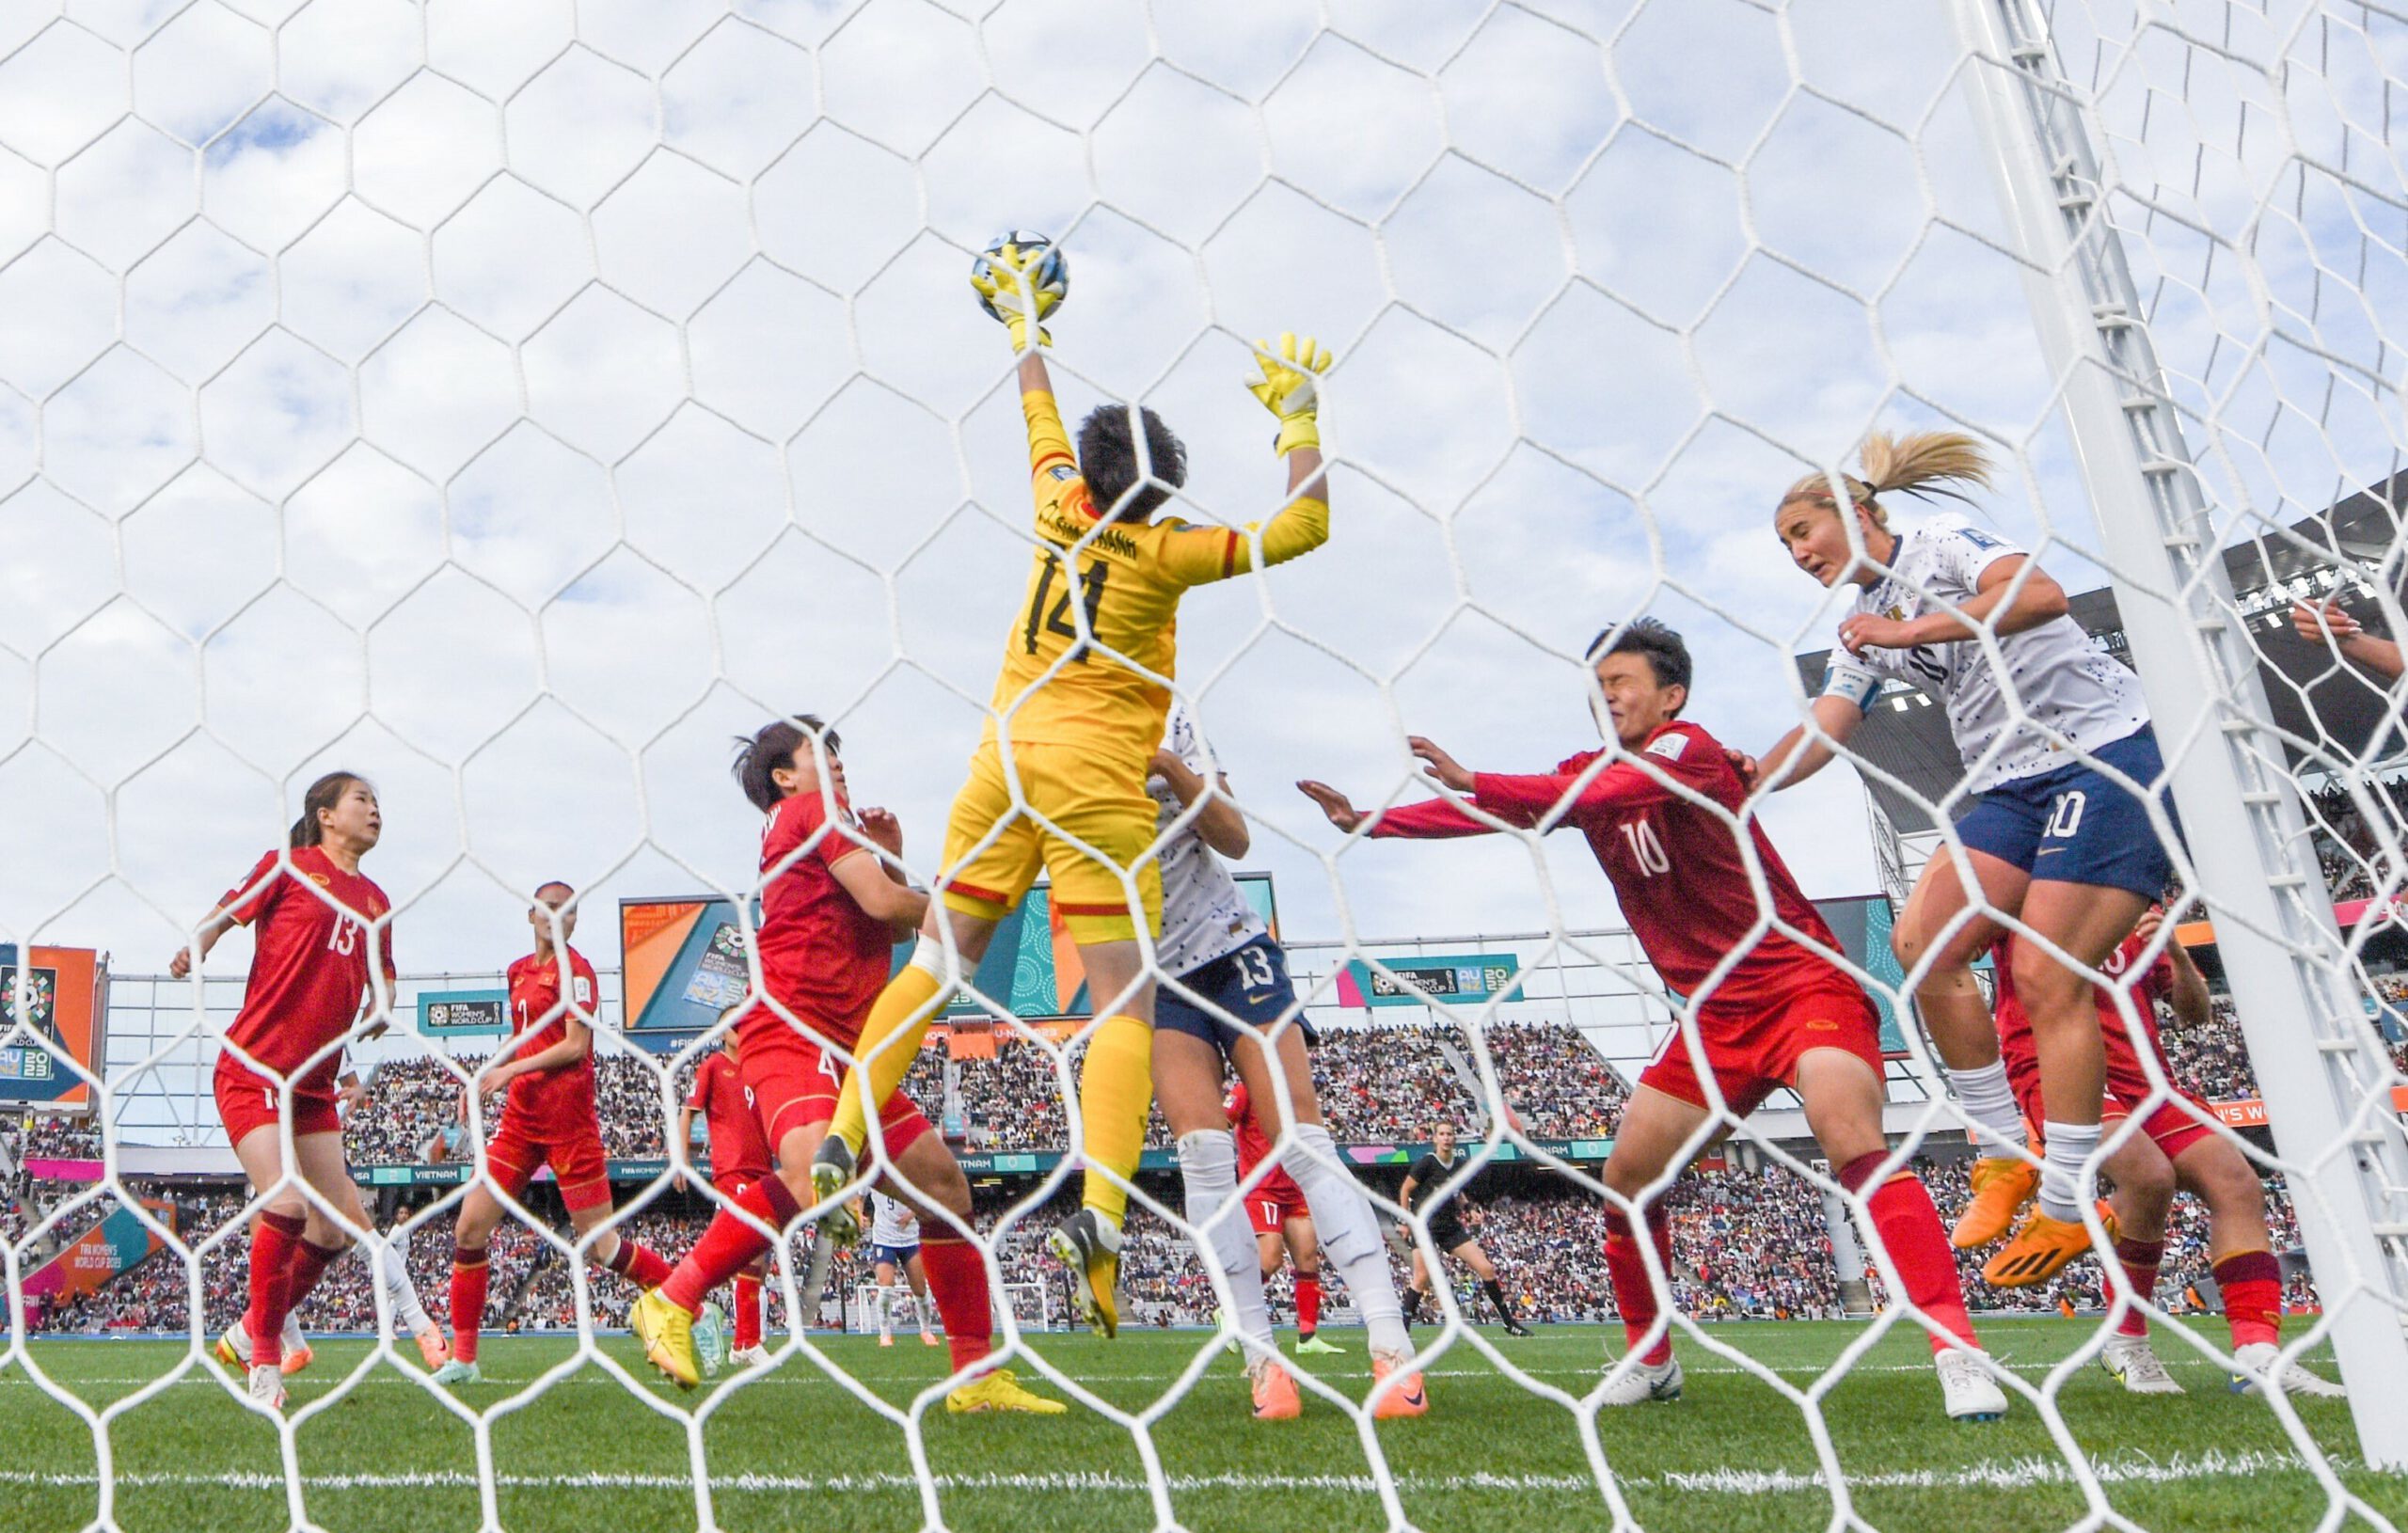 Two teams battle for a soccer ball in front of a white net.